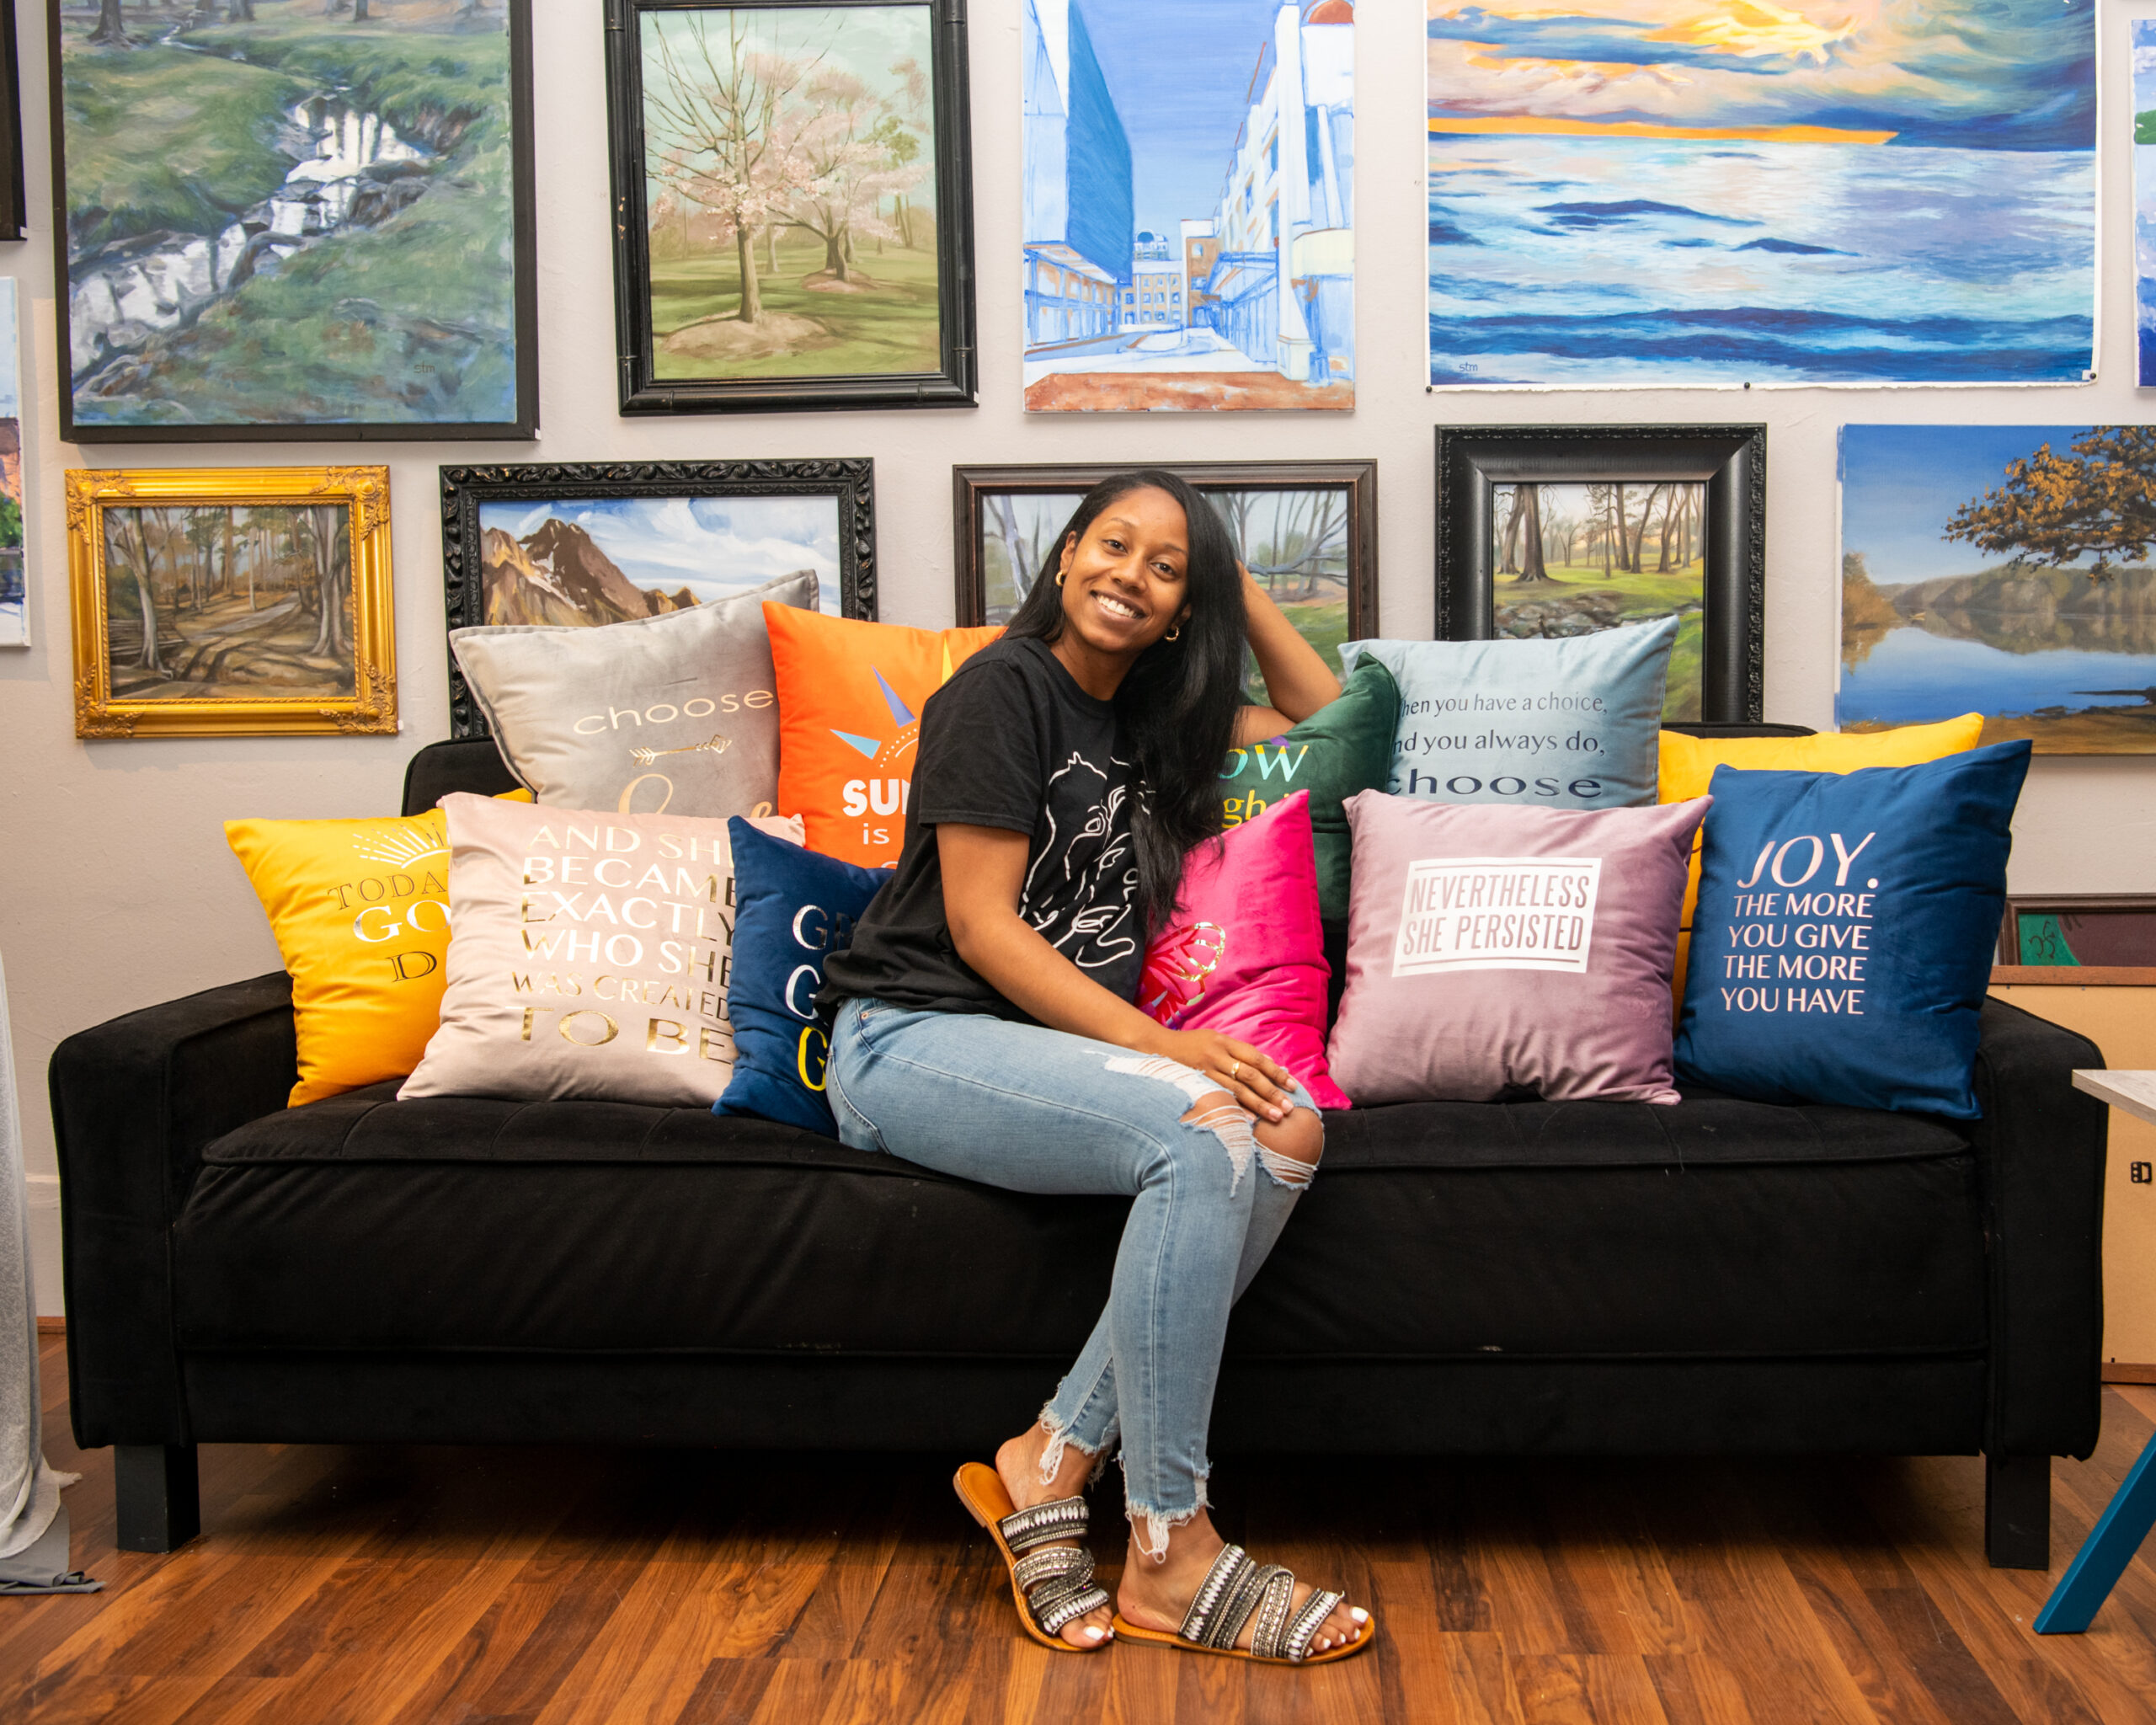 Maya Graham, curator for the Art Market exhibit at the Gallery on Main sits on a sofa with pillows in front of a wall of paintings in High Point, NC.